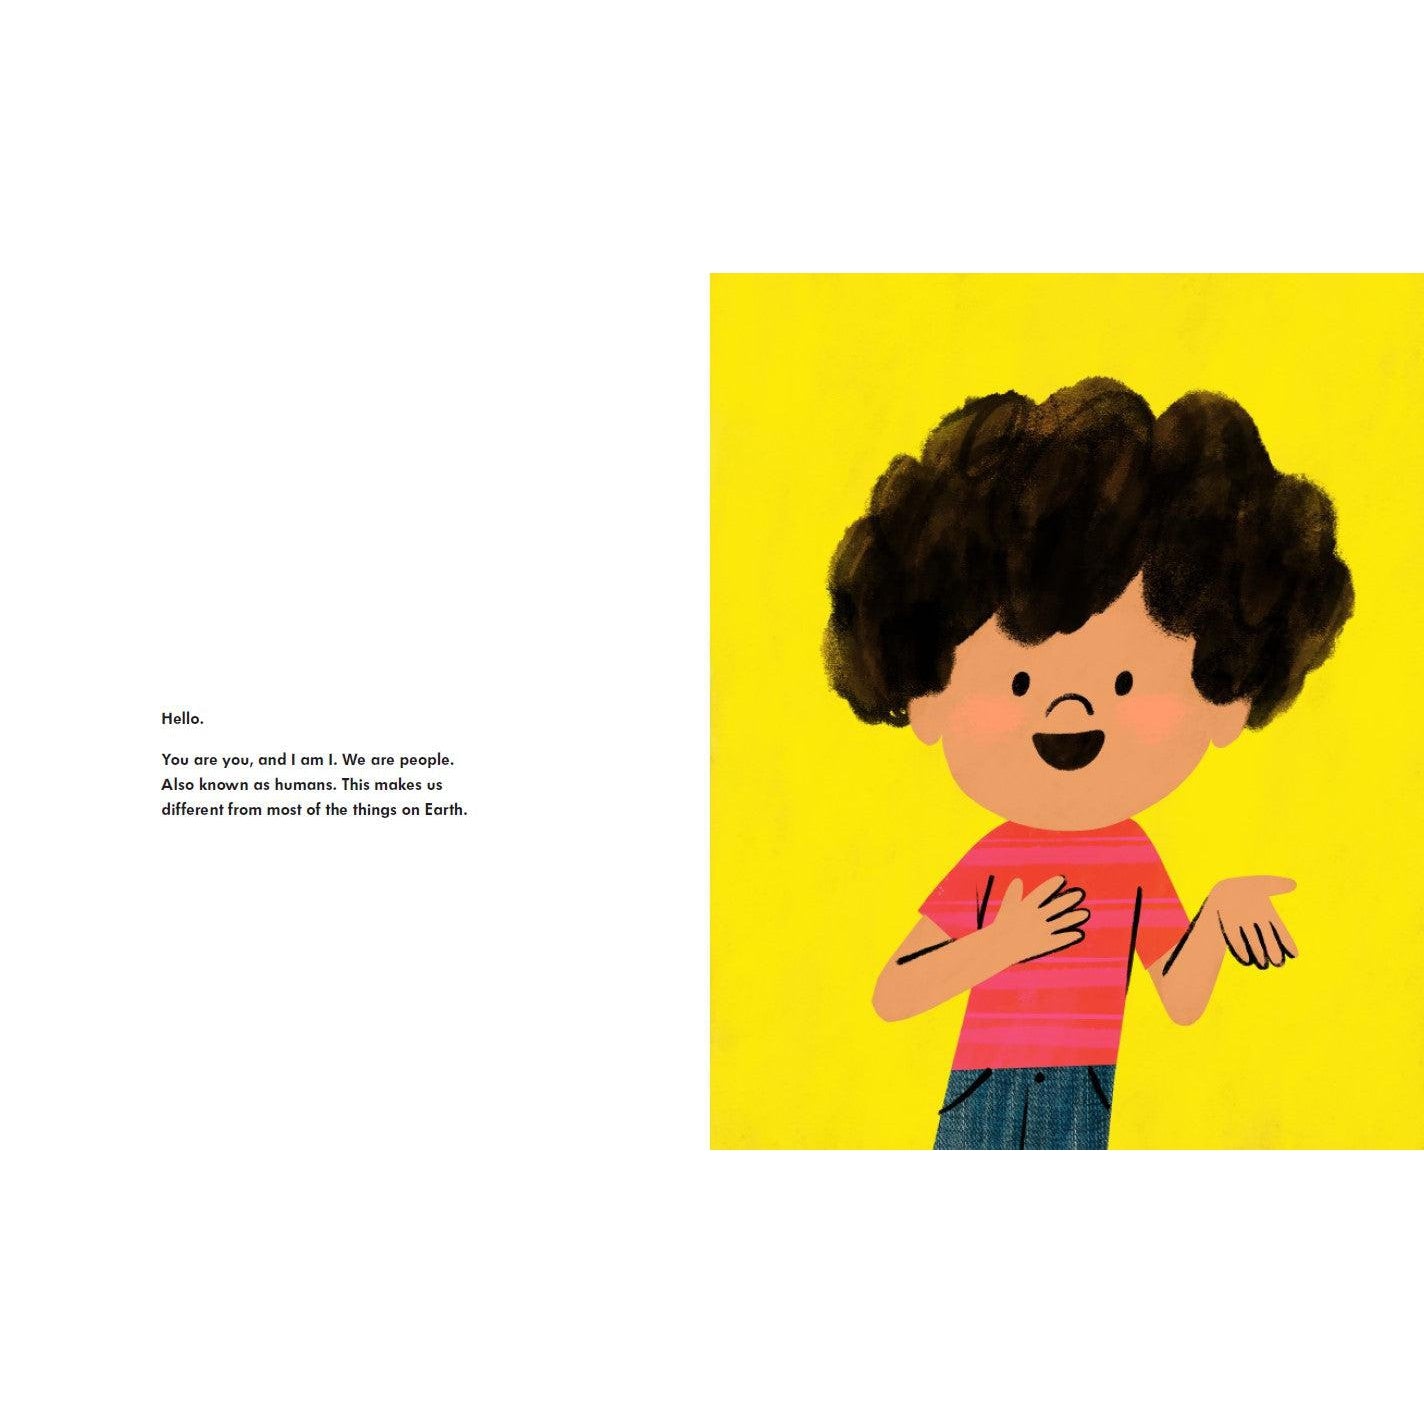 Like | By Annie Barrows and Illustrated by Leo Espinosa-The Arts-Yellow Springs Toy Company